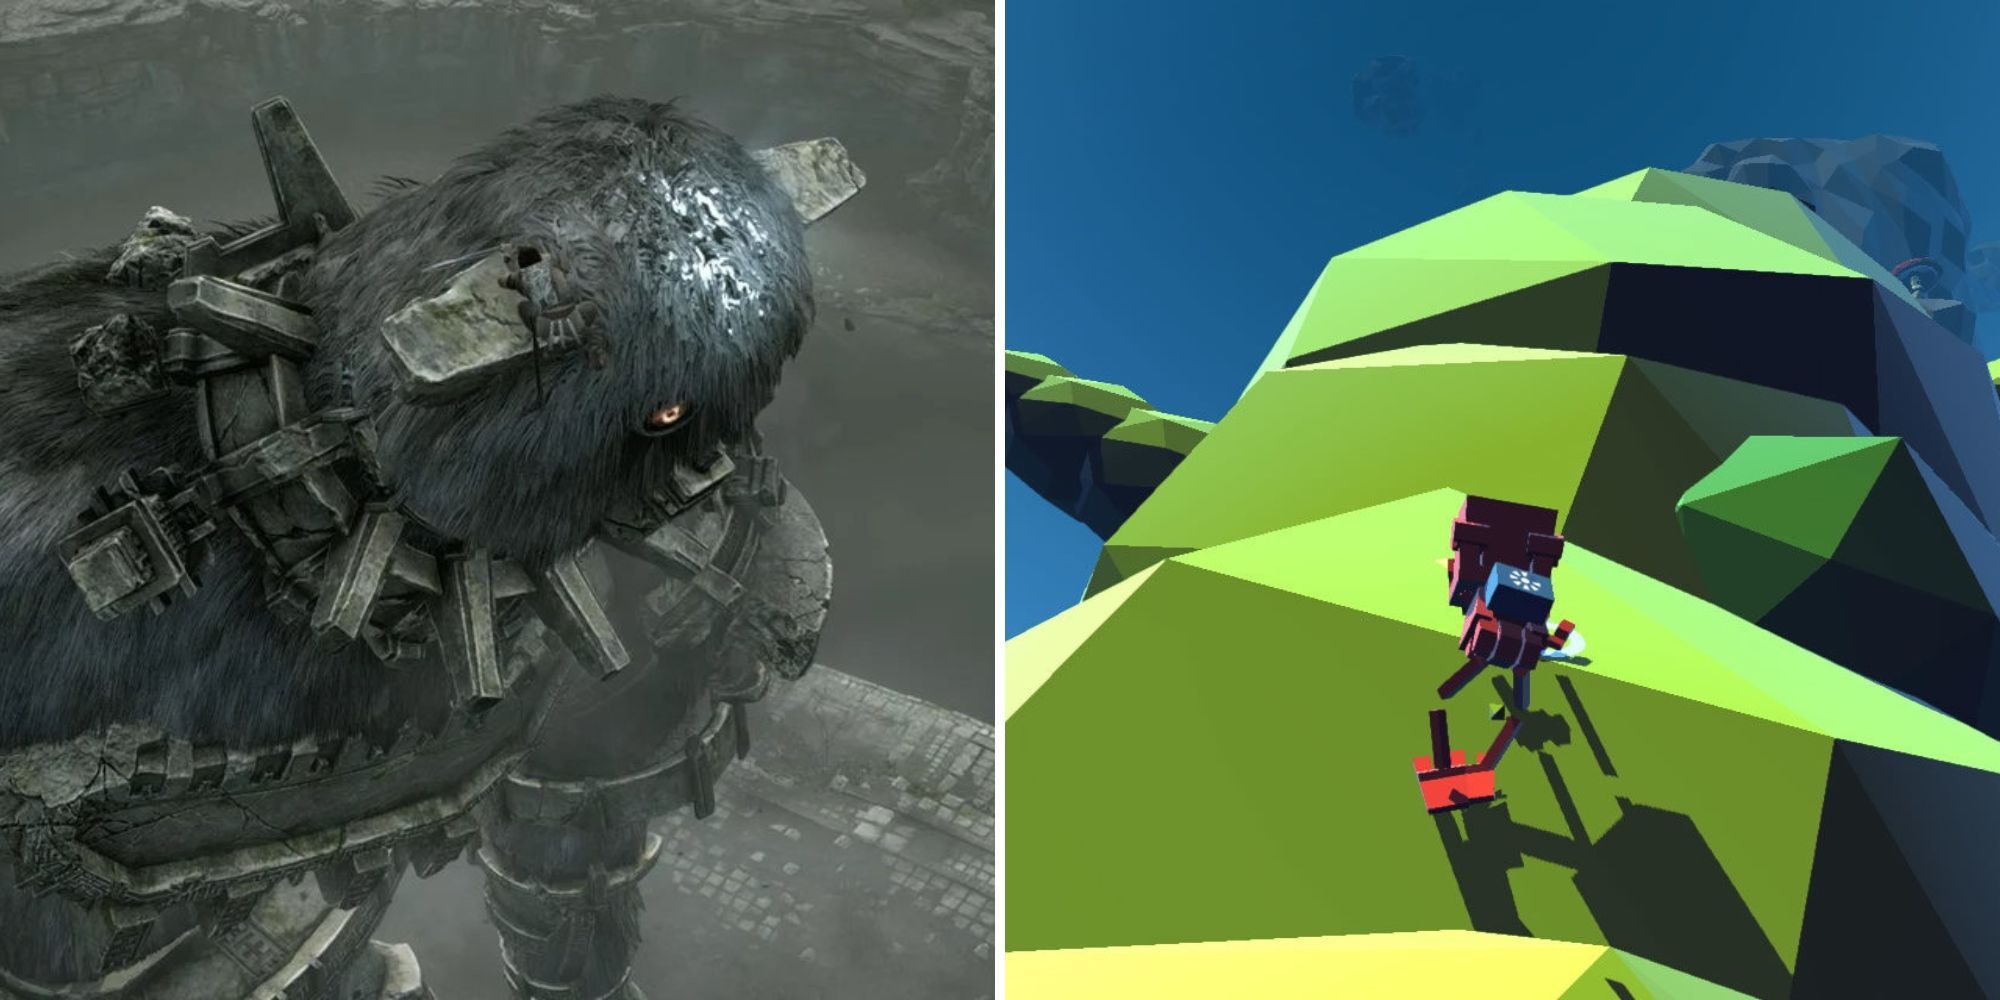 On the left the player is climbing up a titan in Shadow Of The Colossus on the left a robot climbs up the stalk of a plant in Grow Home